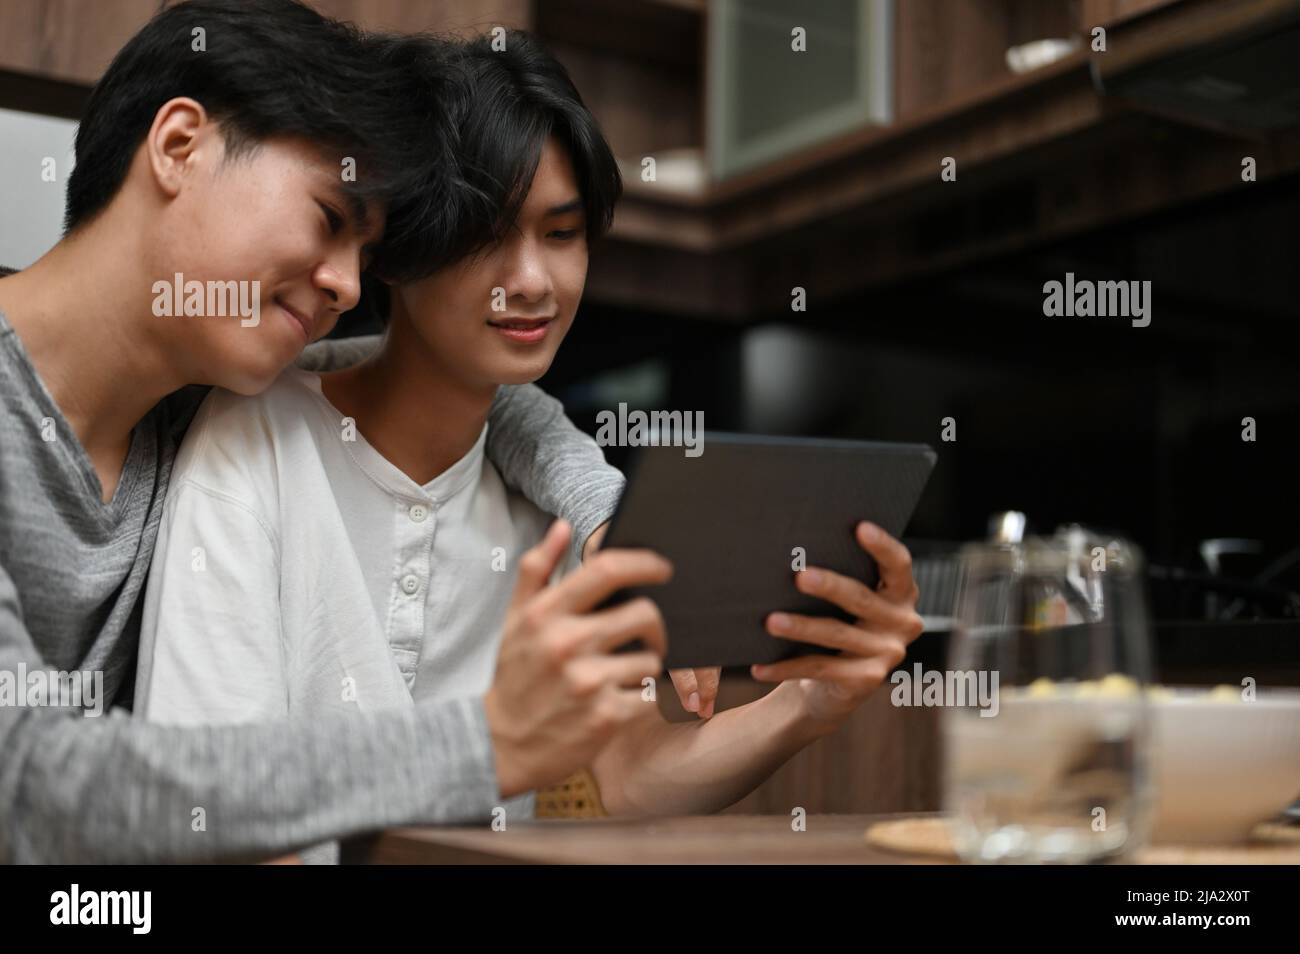 Happy asian young gay men couple showing some LGBT love affection, watching movie on tablet together in the kitchen. Stock Photo